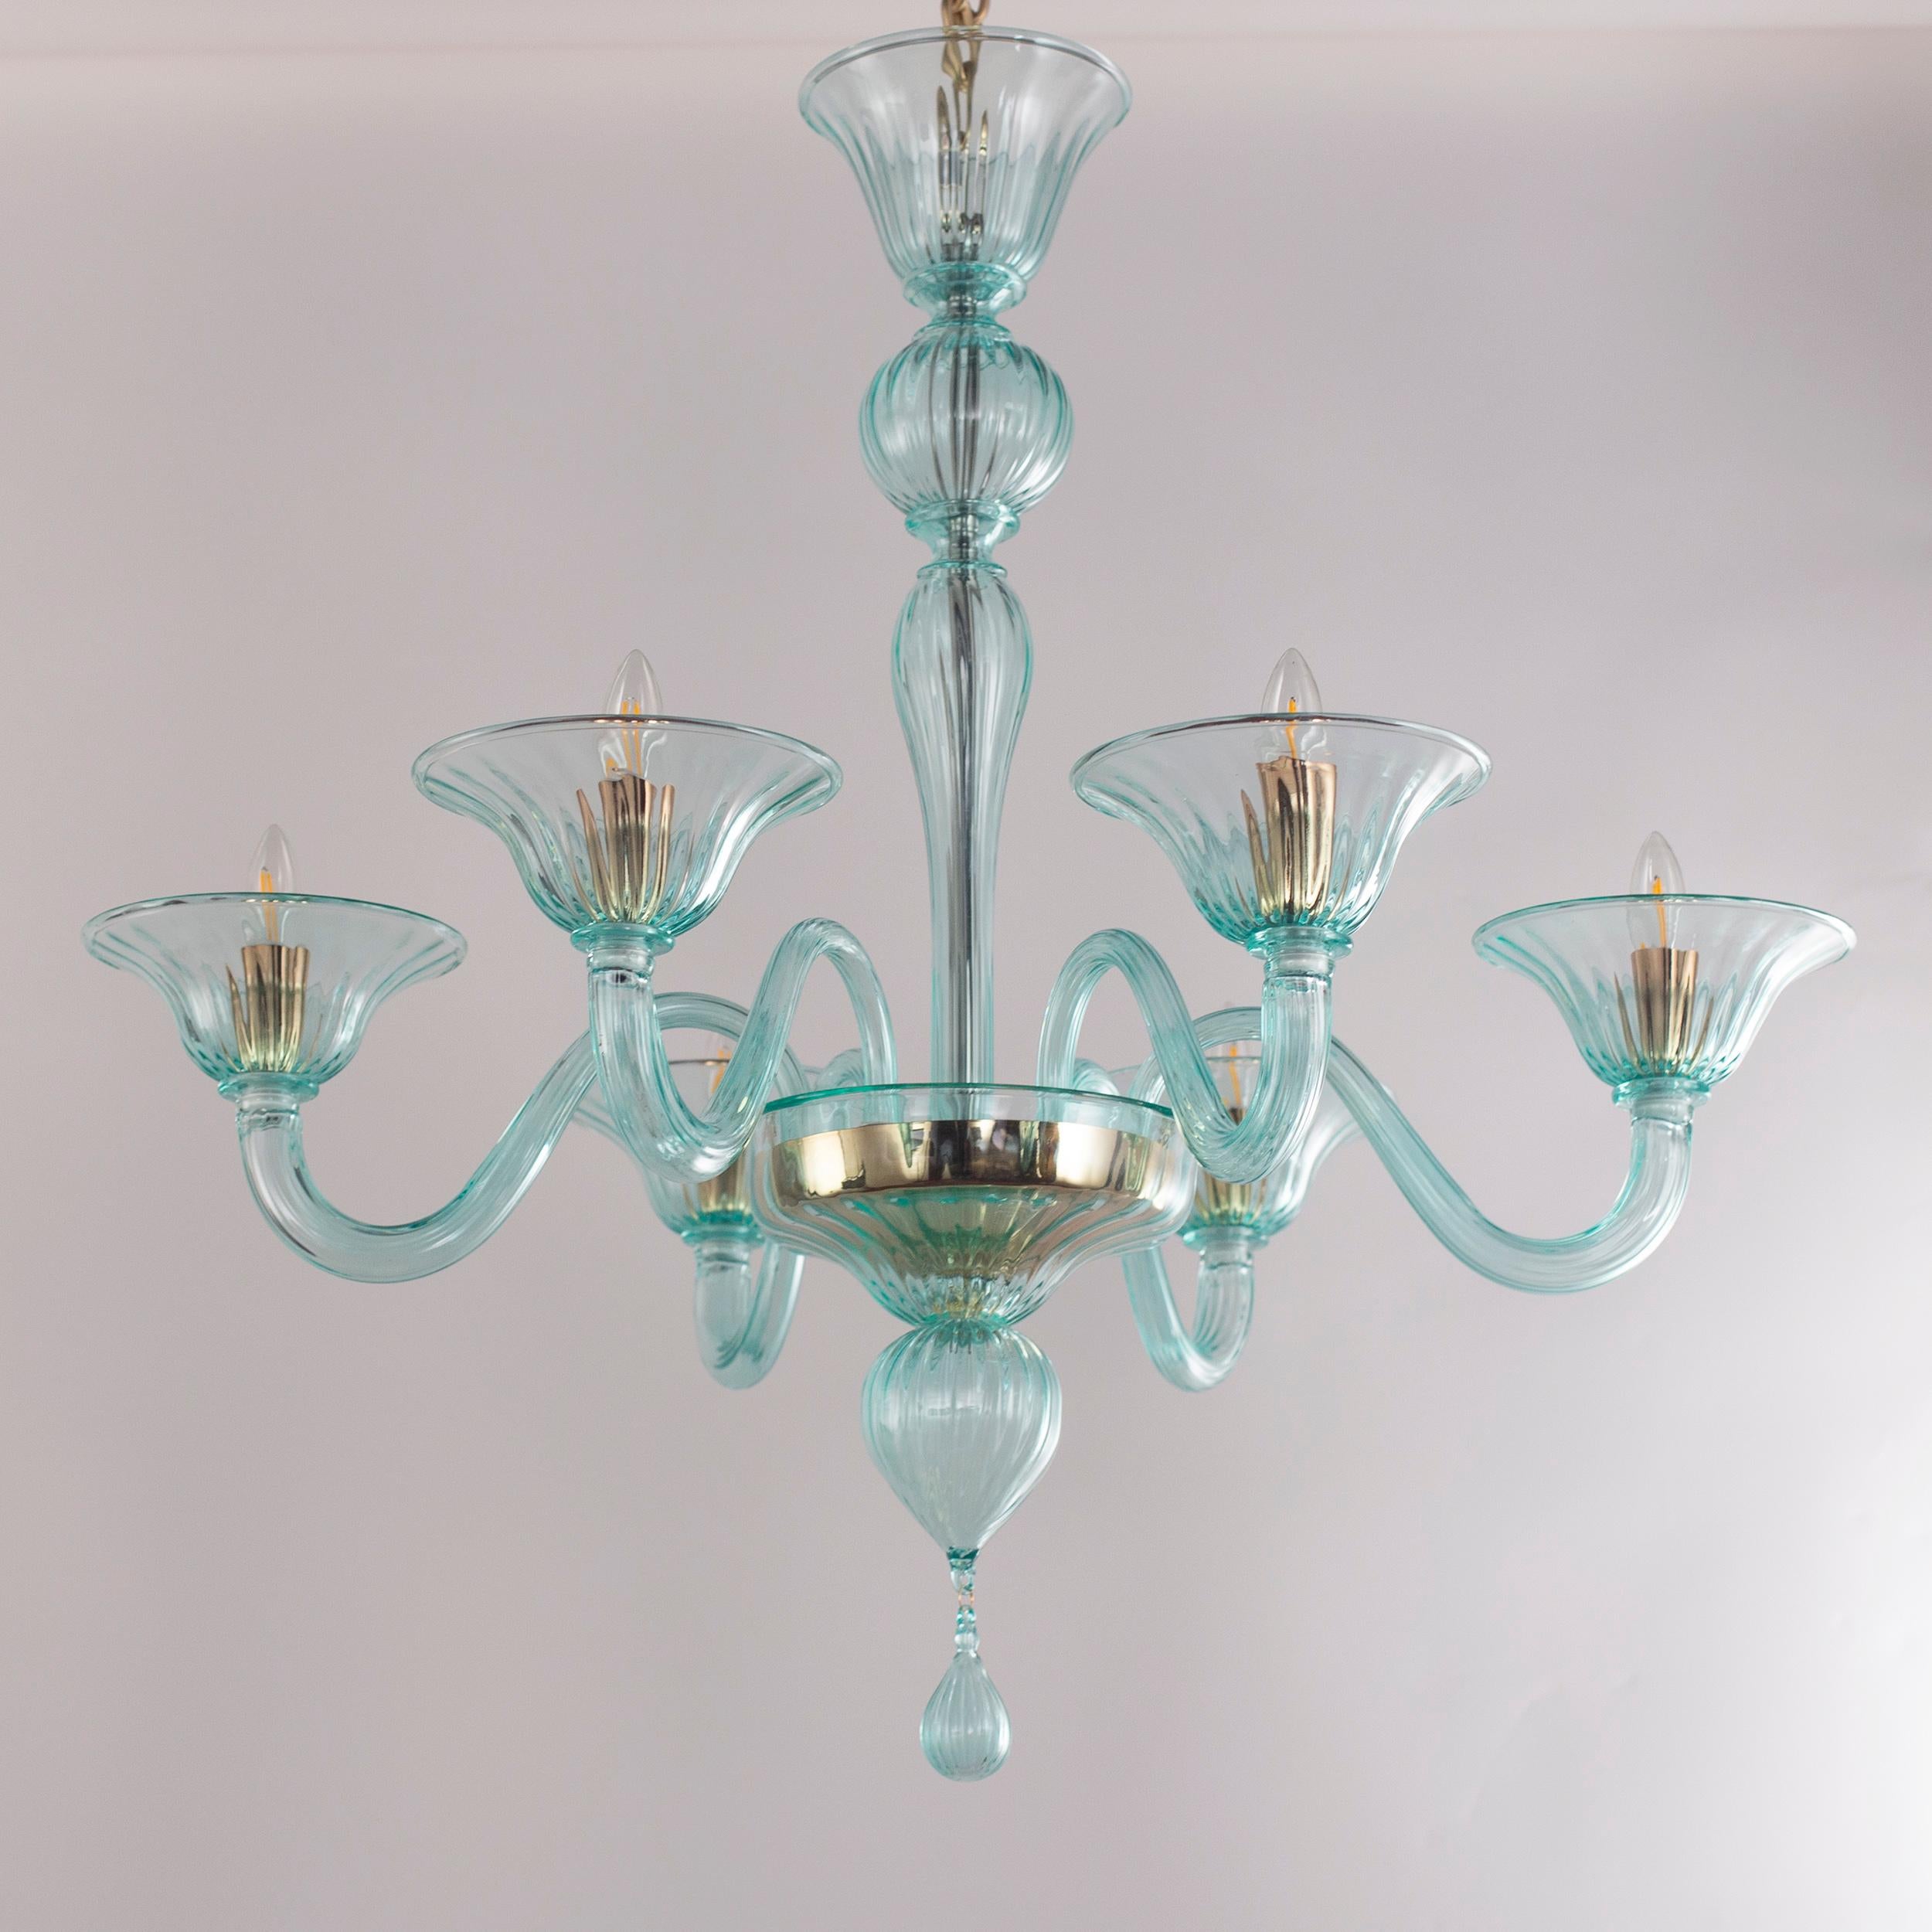 Simplicissimus 360 chandelier, 6 lights, Light Marine Green artistic glass by Multiforme
This collection in Murano glass is characterized by superb simplicity. It is the result of a research which harks back to the Classic Murano chandeliers with